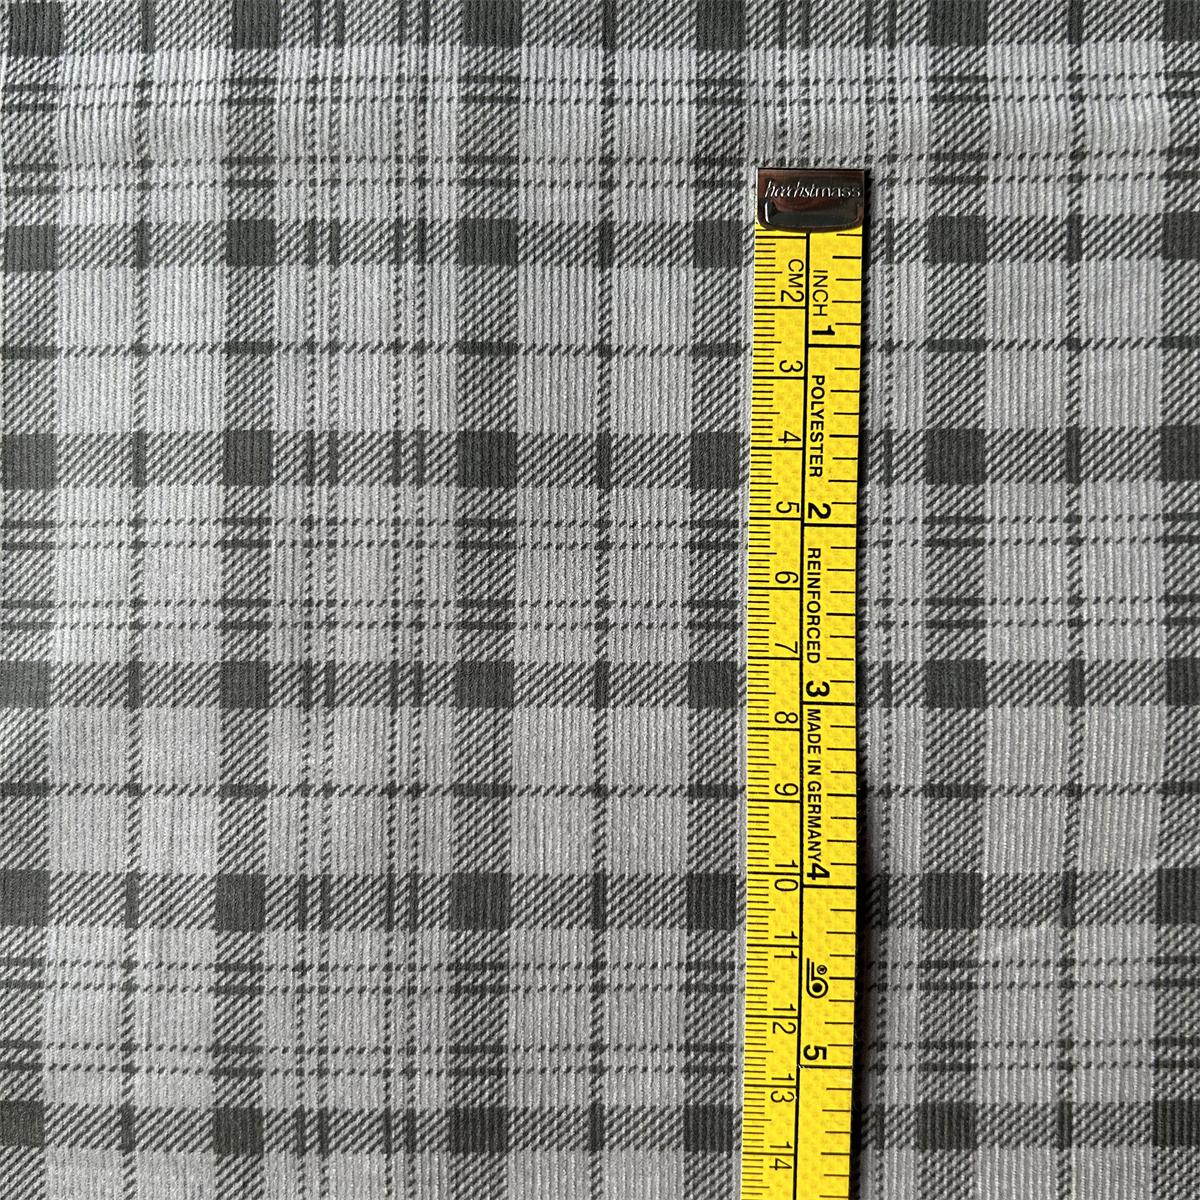 Corduroy Clothes and Fabric Manufacturer in China soft comfortable Printed cotton corduroy woven shirt fabric for mens casual shirts